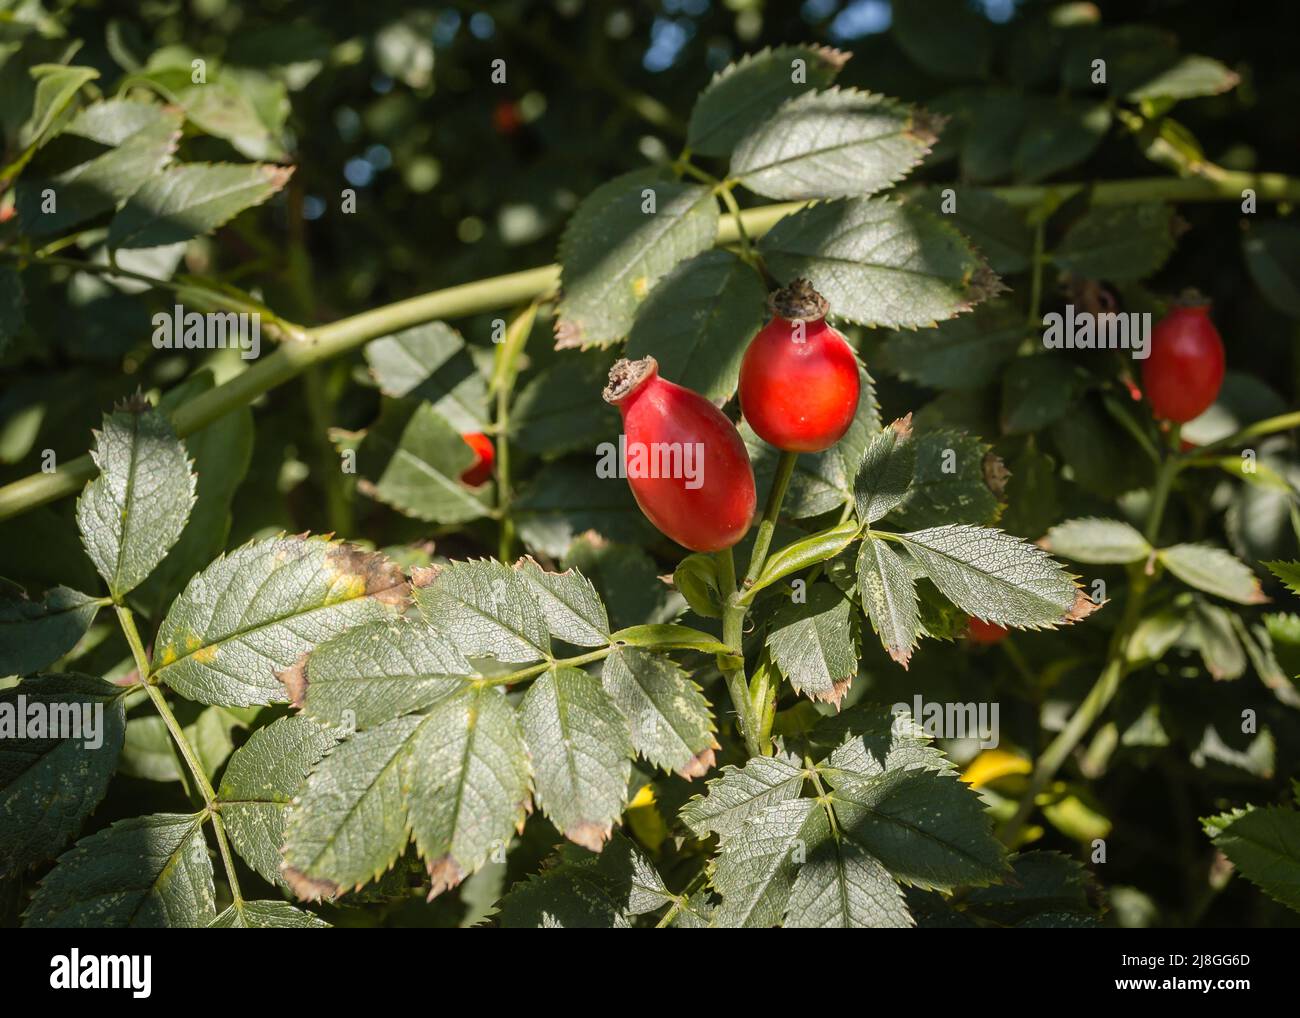 Closeup of Ripened Dog Rose Rosa Canina red berries. Red rosehip berries on bush. Wild Ripe Briar on branch. Remedy plants harvest for Herbal medicine Stock Photo